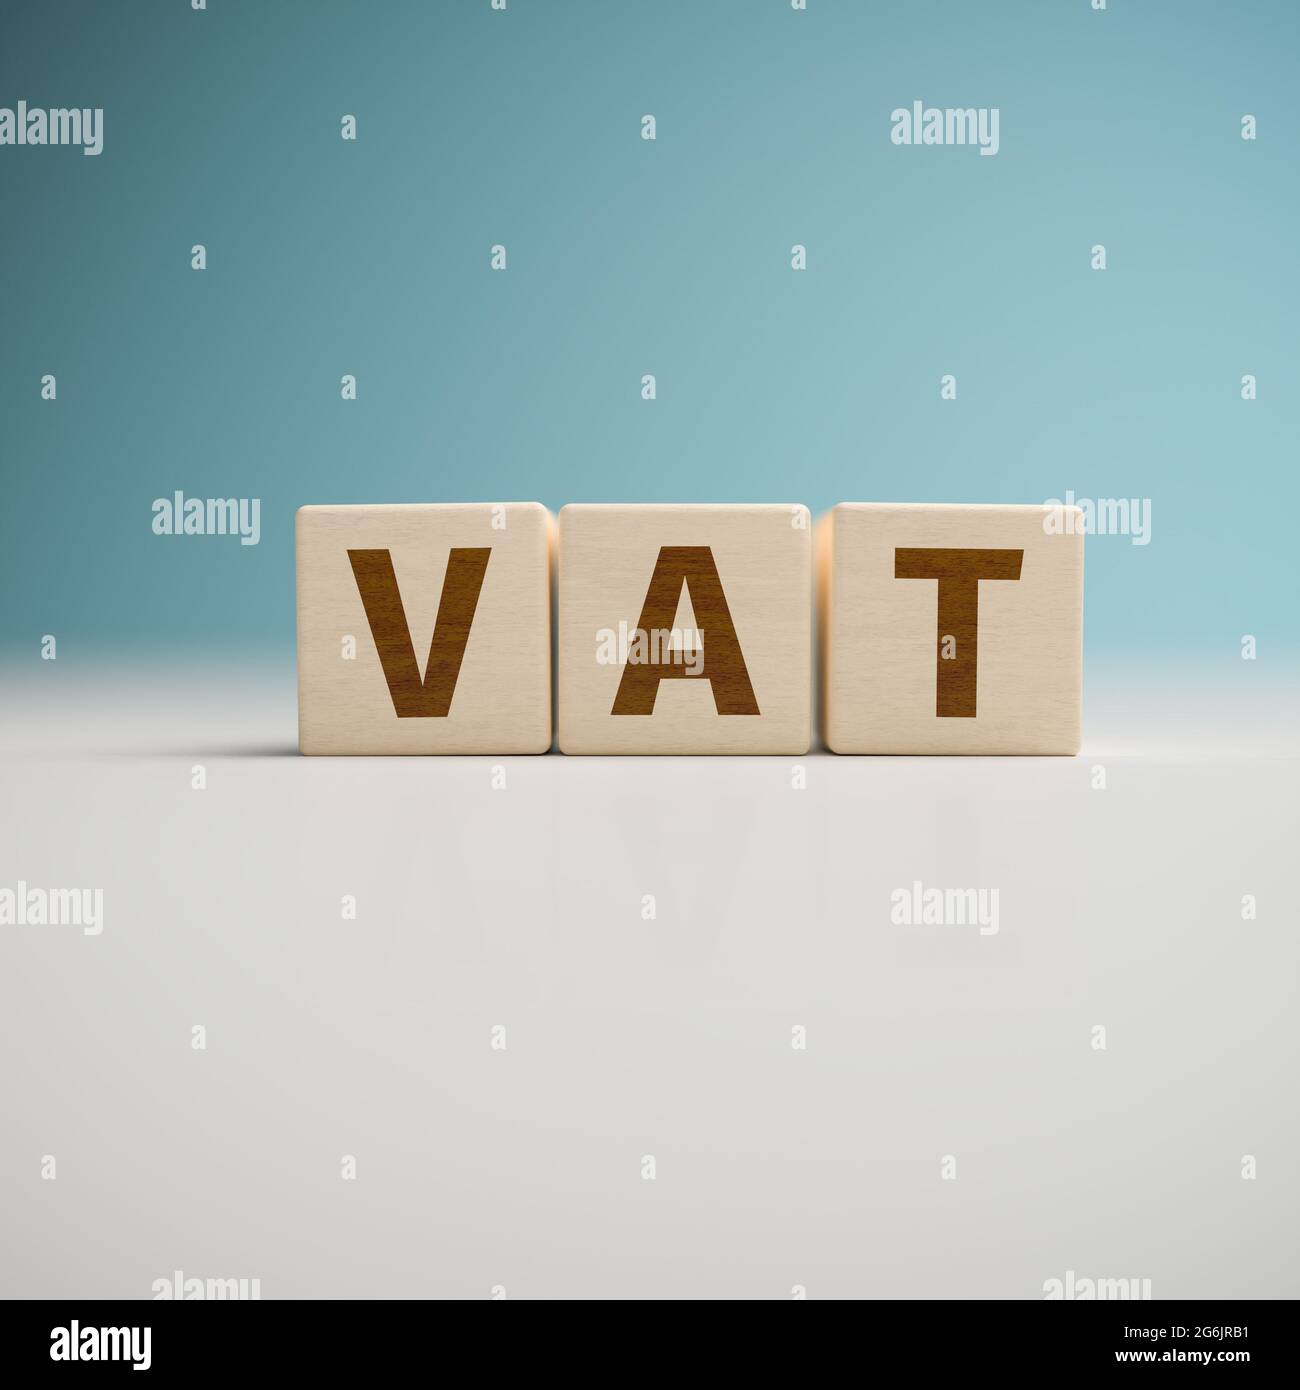 Wooden toy blocks forming the word 'vat' - value added tax concept Stock Photo